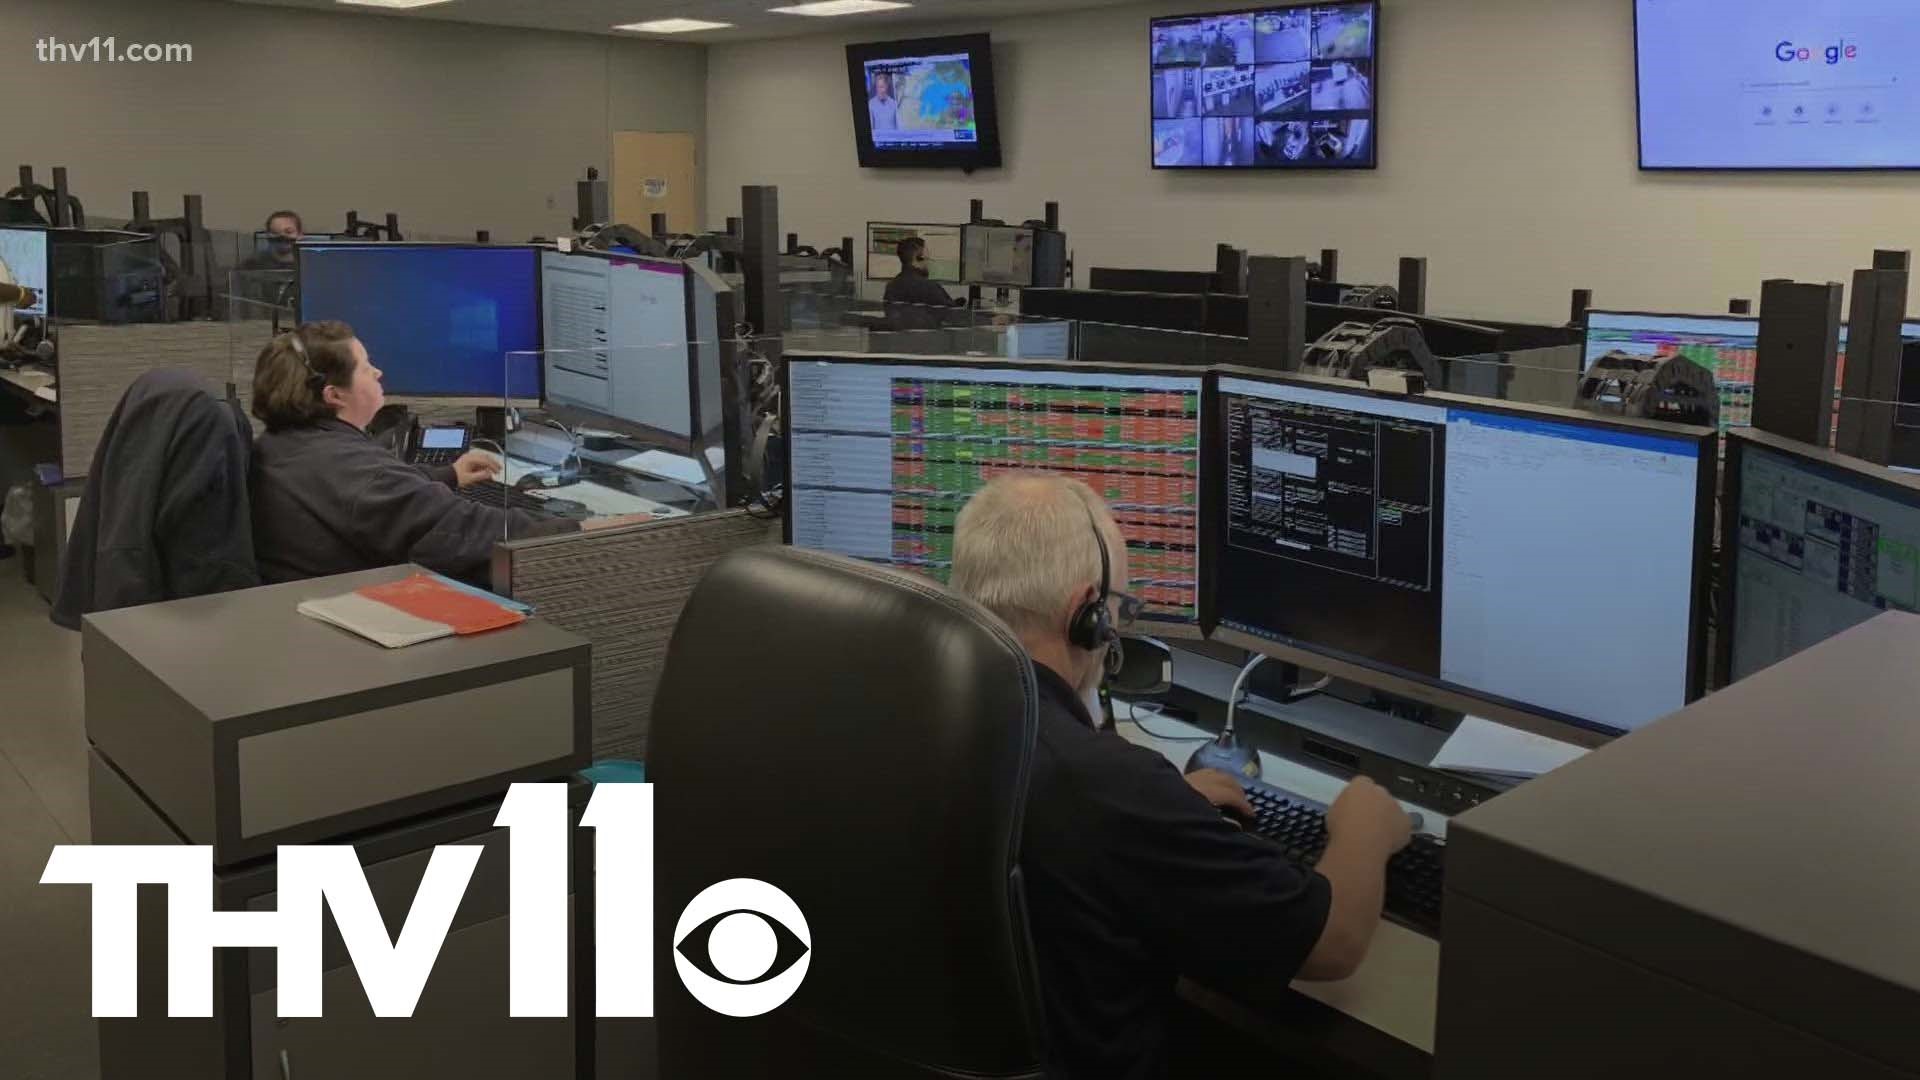 Arkansas' trauma communications center was briefly turned into the COVID communications center to help navigate patient capacity and transfer among hospitals.